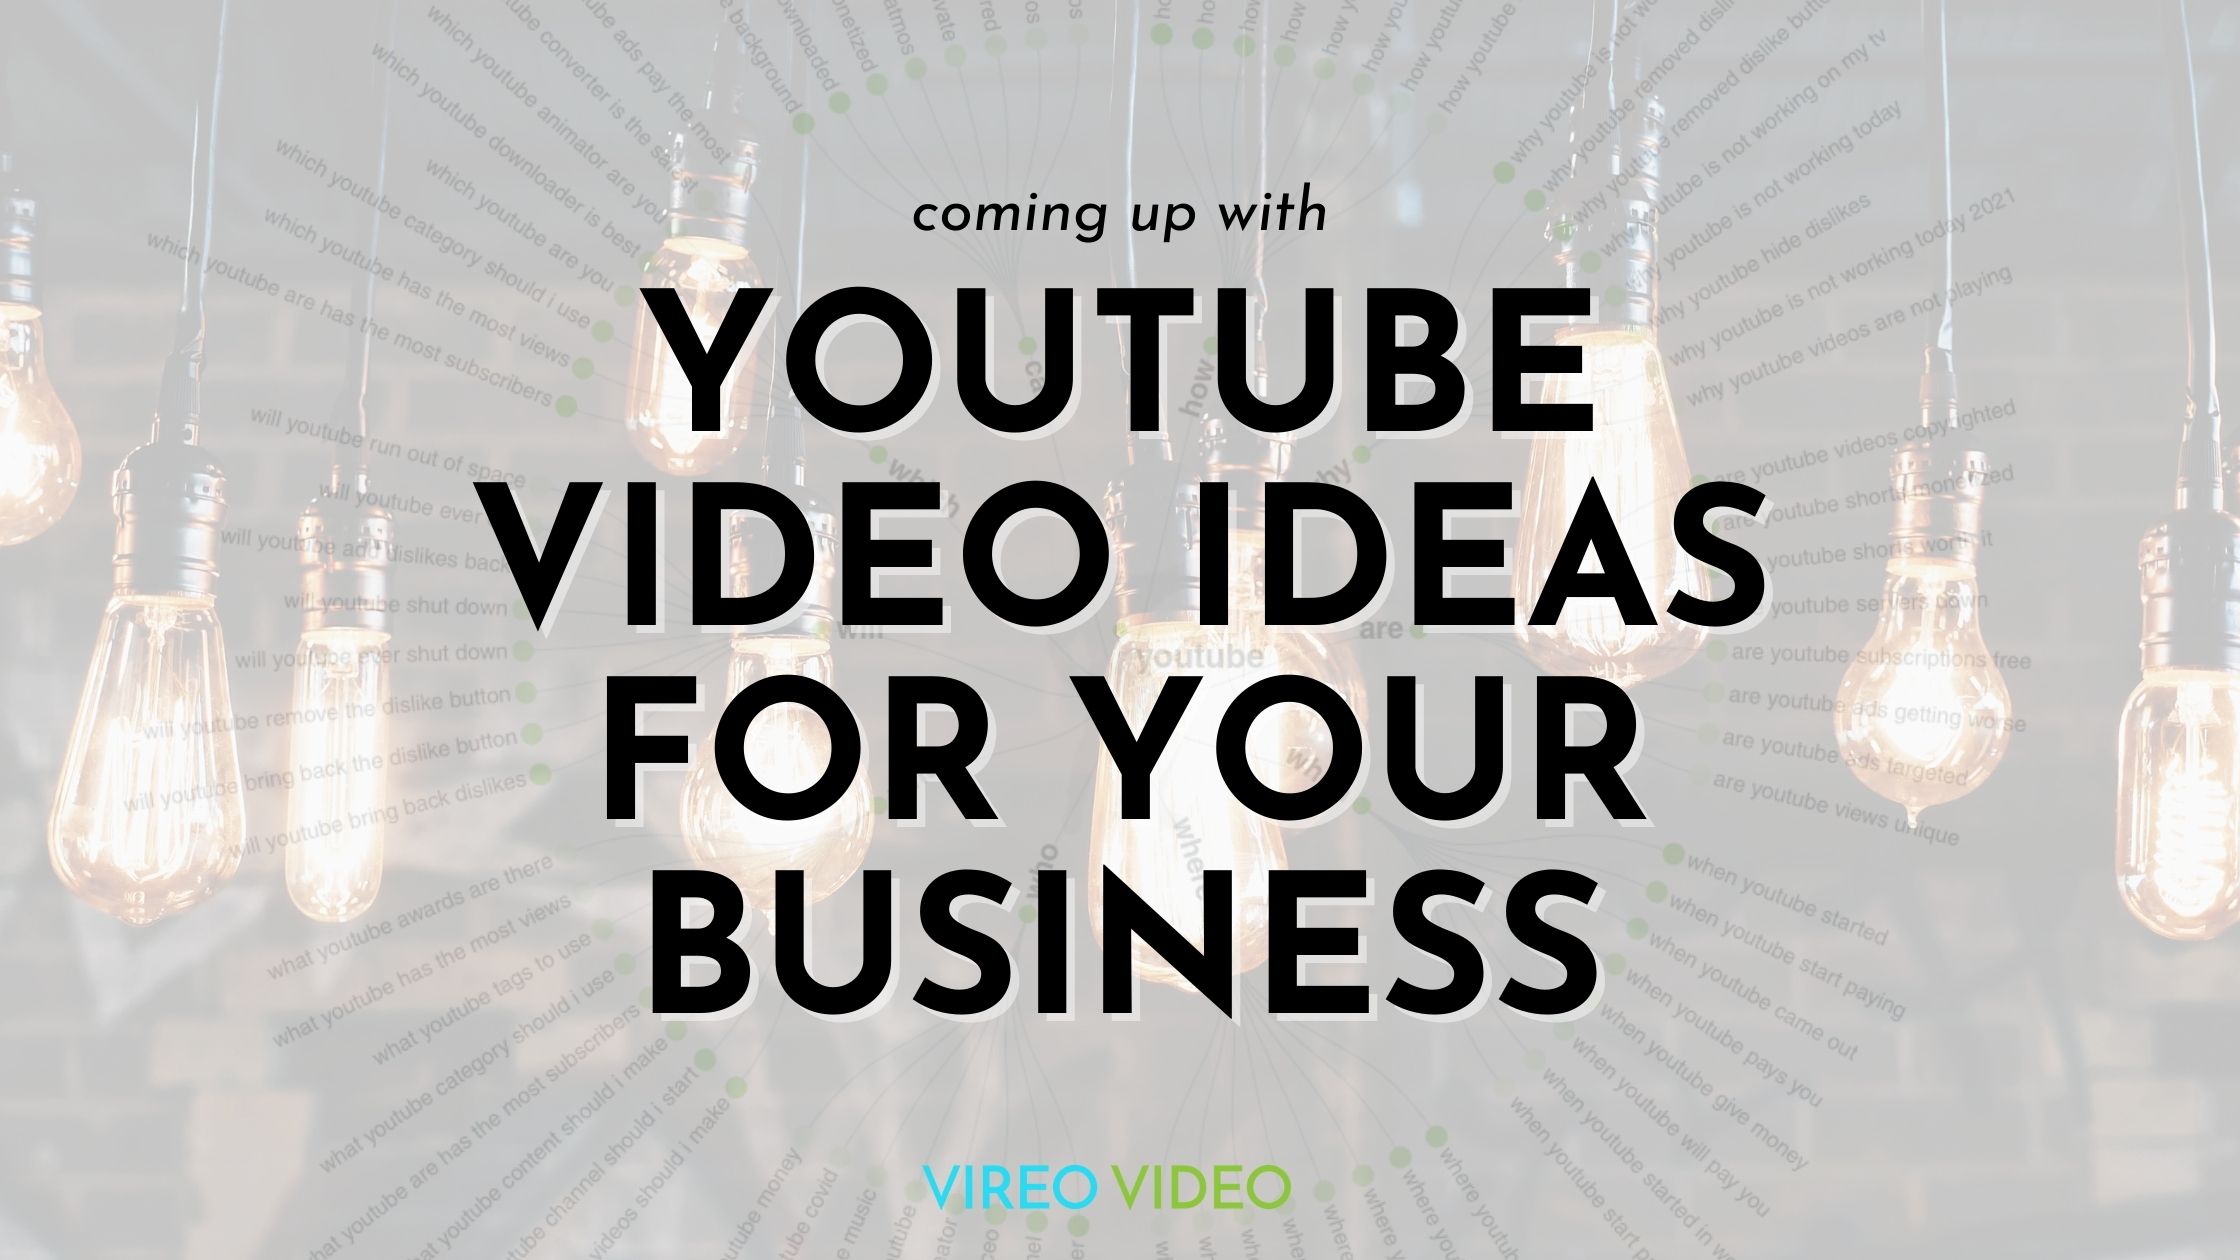 YouTube Content Strategy - 7 ways to come up with video ideas and topics